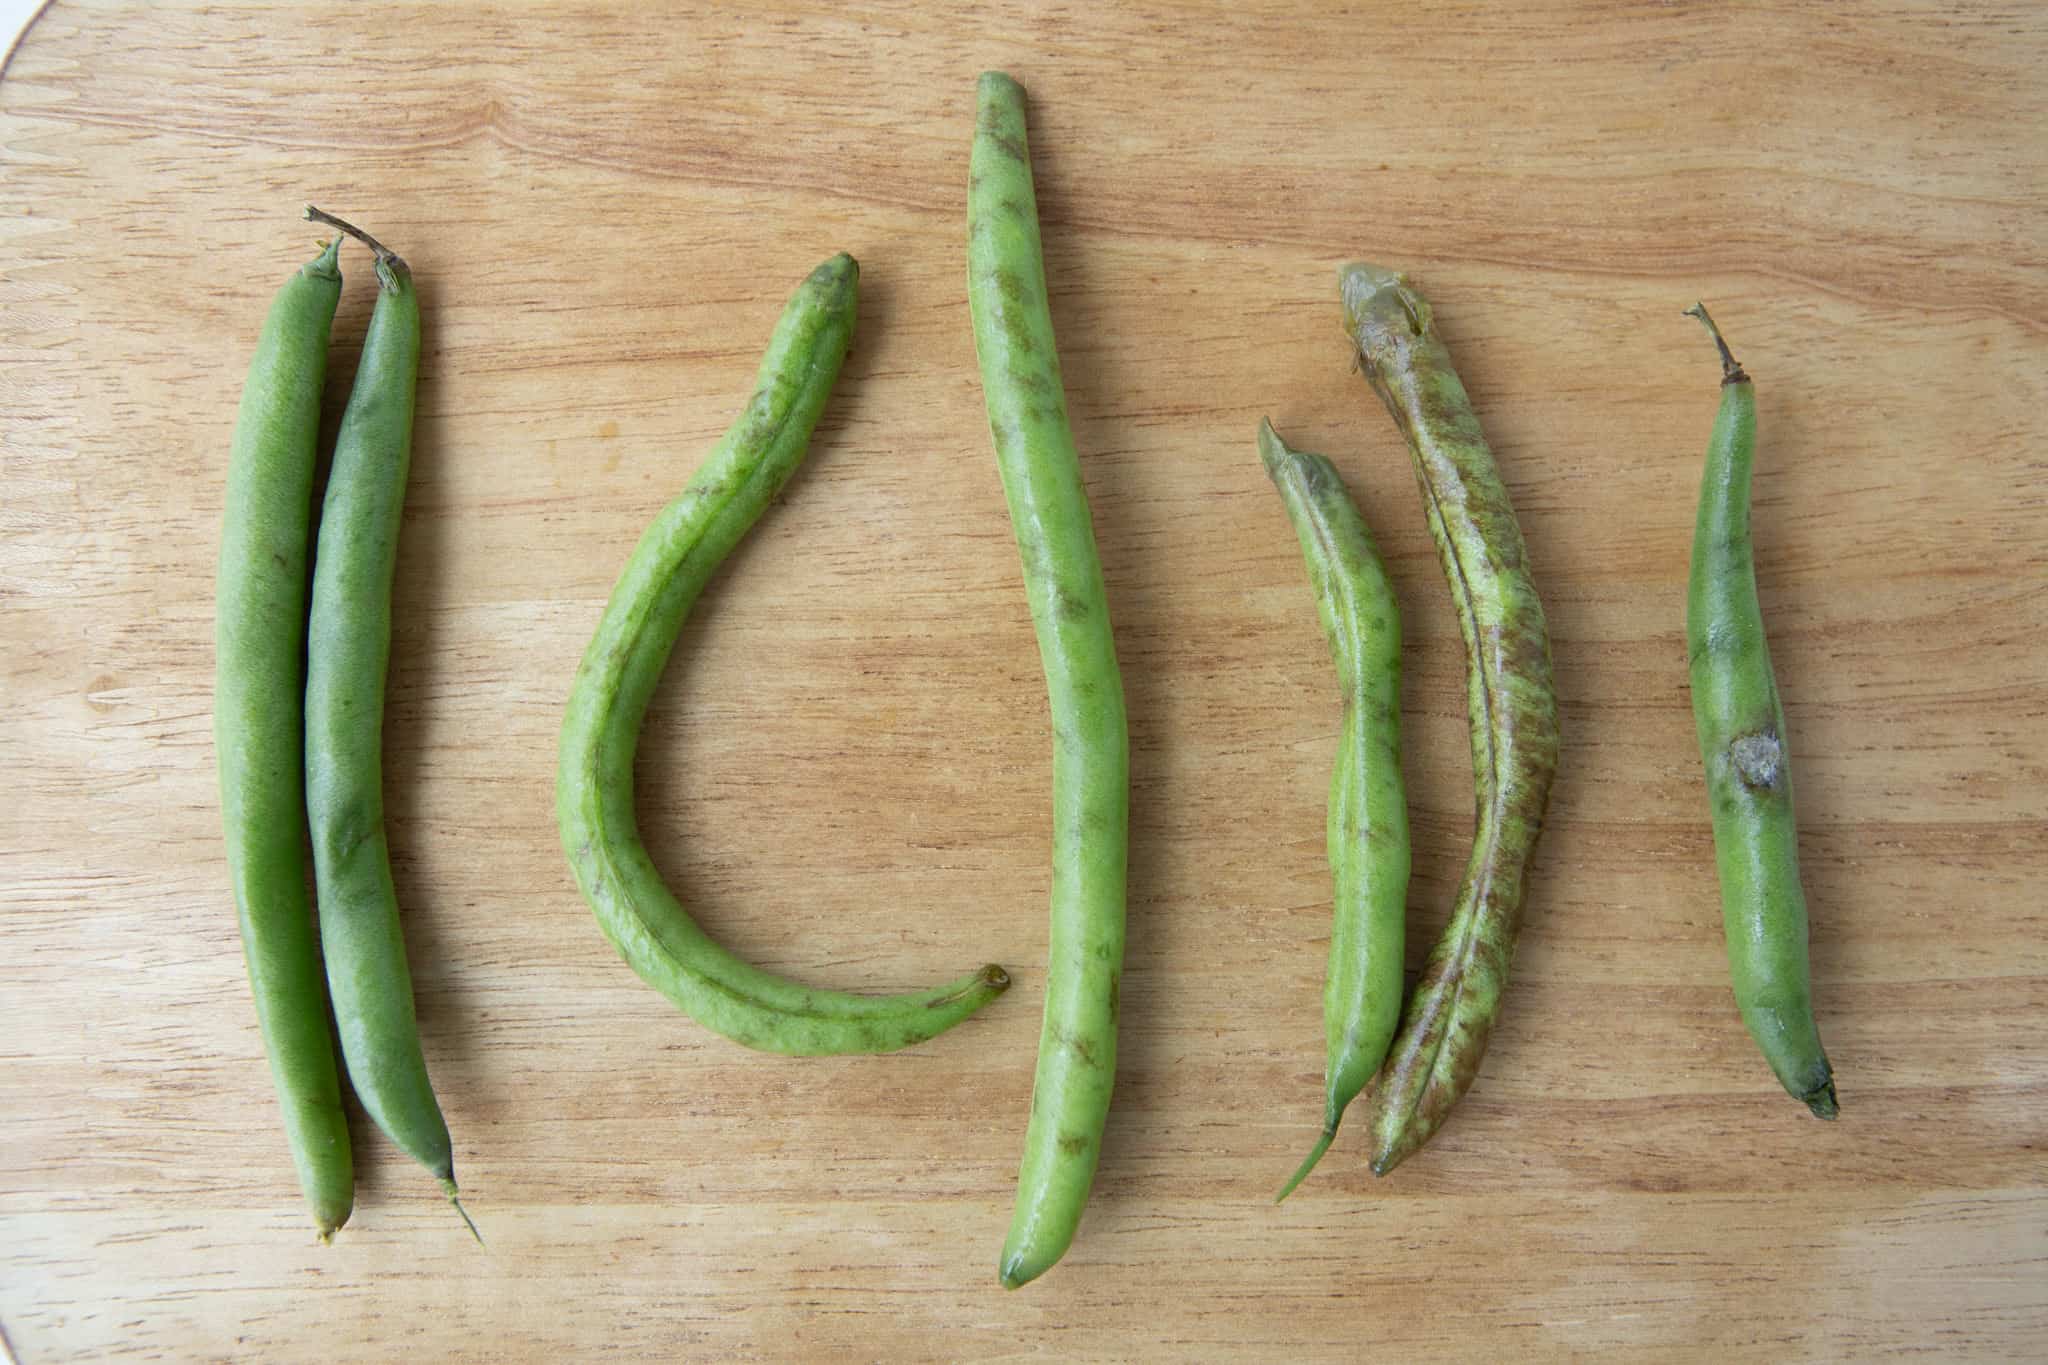 green beans showing signs of aging such as limp, slimy texture, and mold.